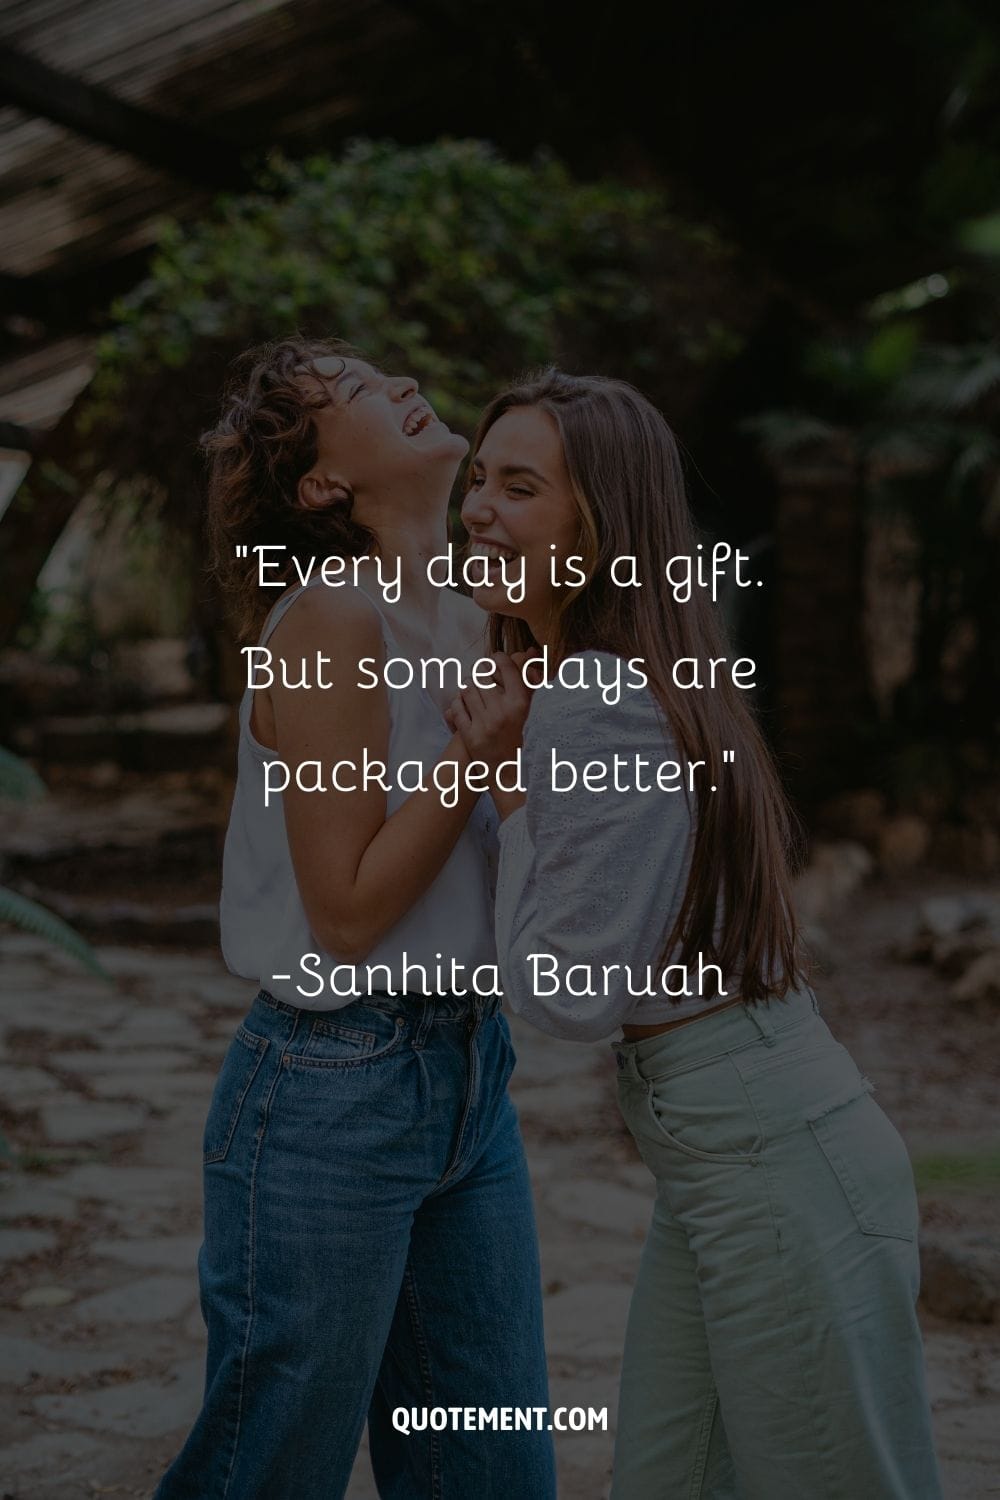 “Every day is a gift. But some days are packaged better.” ― Sanhita Baruah